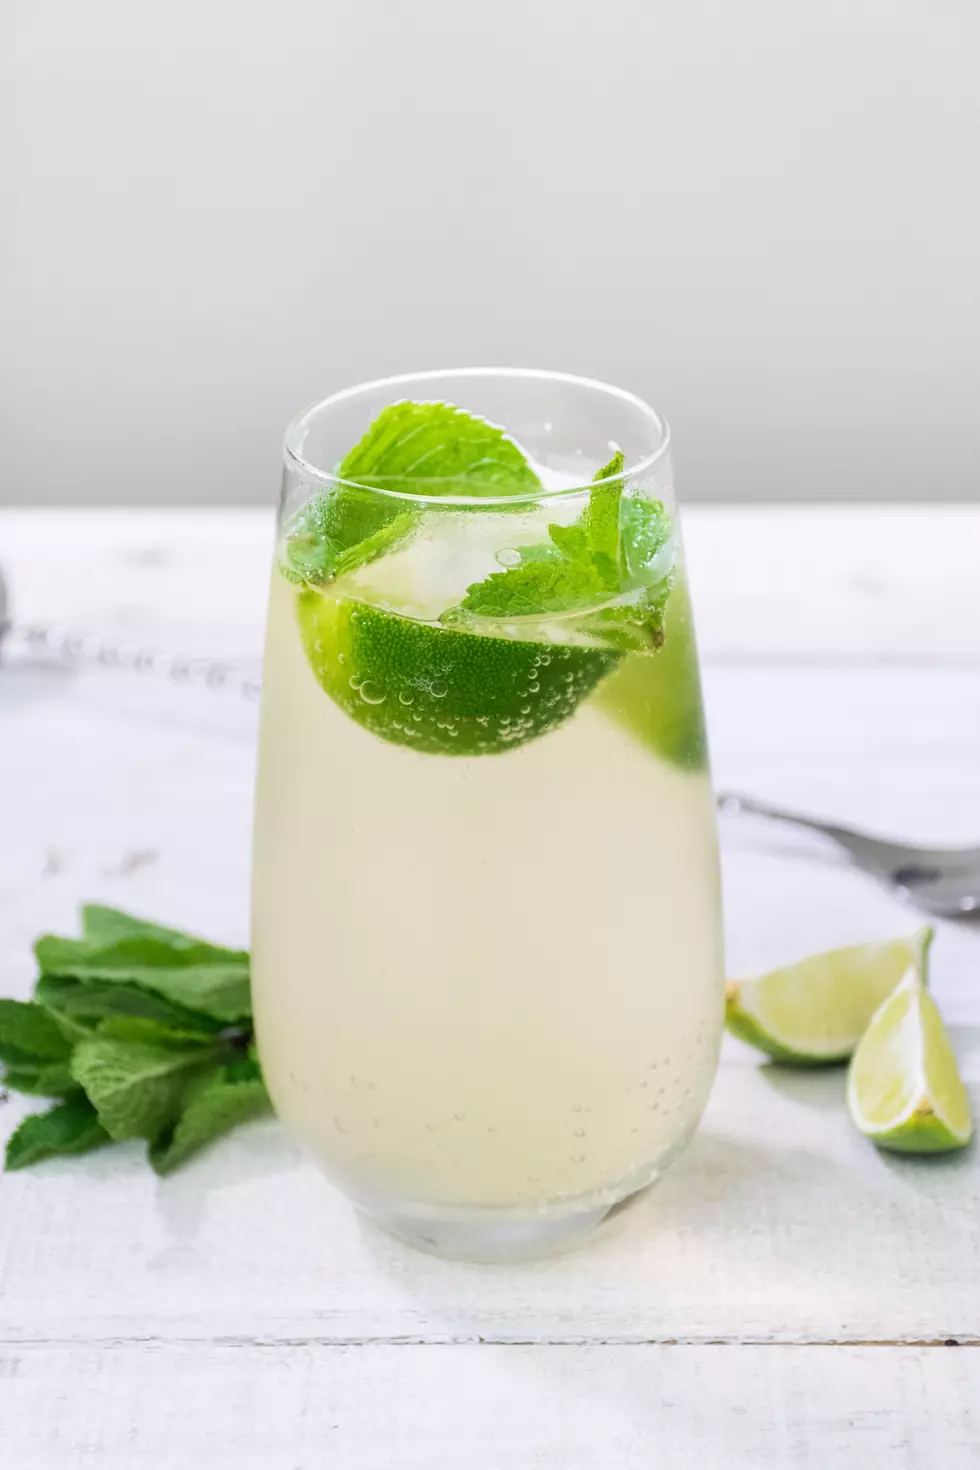 Make This Lime, Mint, Coconut Cocktail with Sake and Gin For a Refreshing Drink